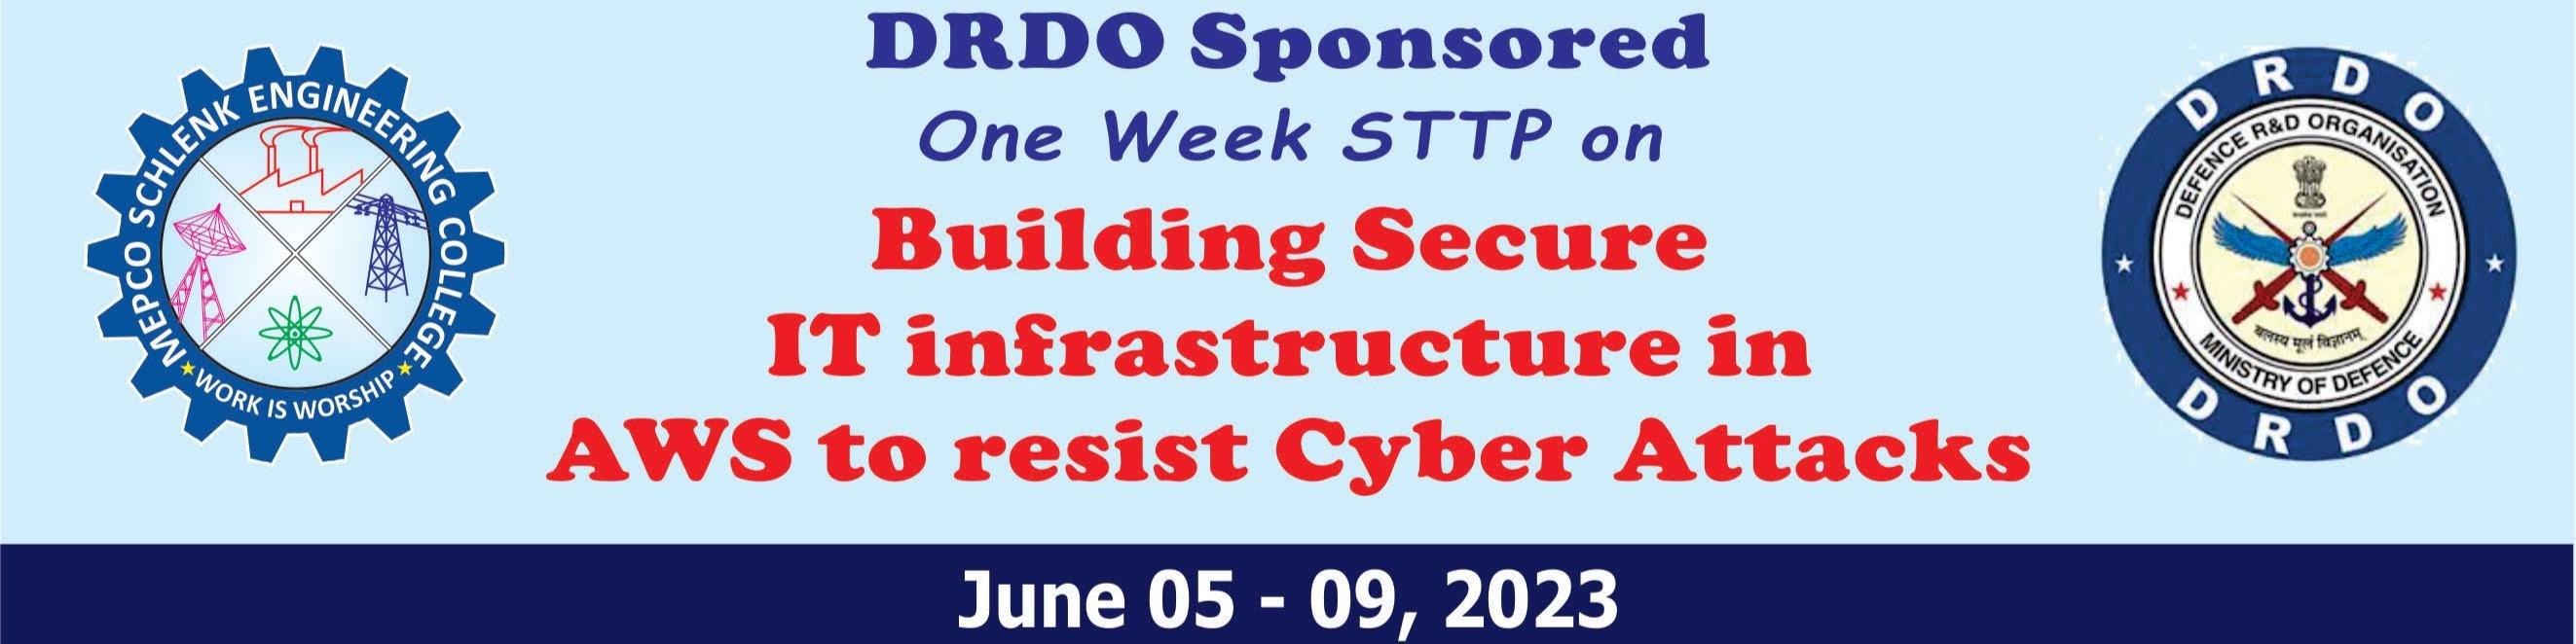 DRDO sponsored one-week STTP on Building Secure IT infrastructure in AWS to resist Cyber attacks 2023